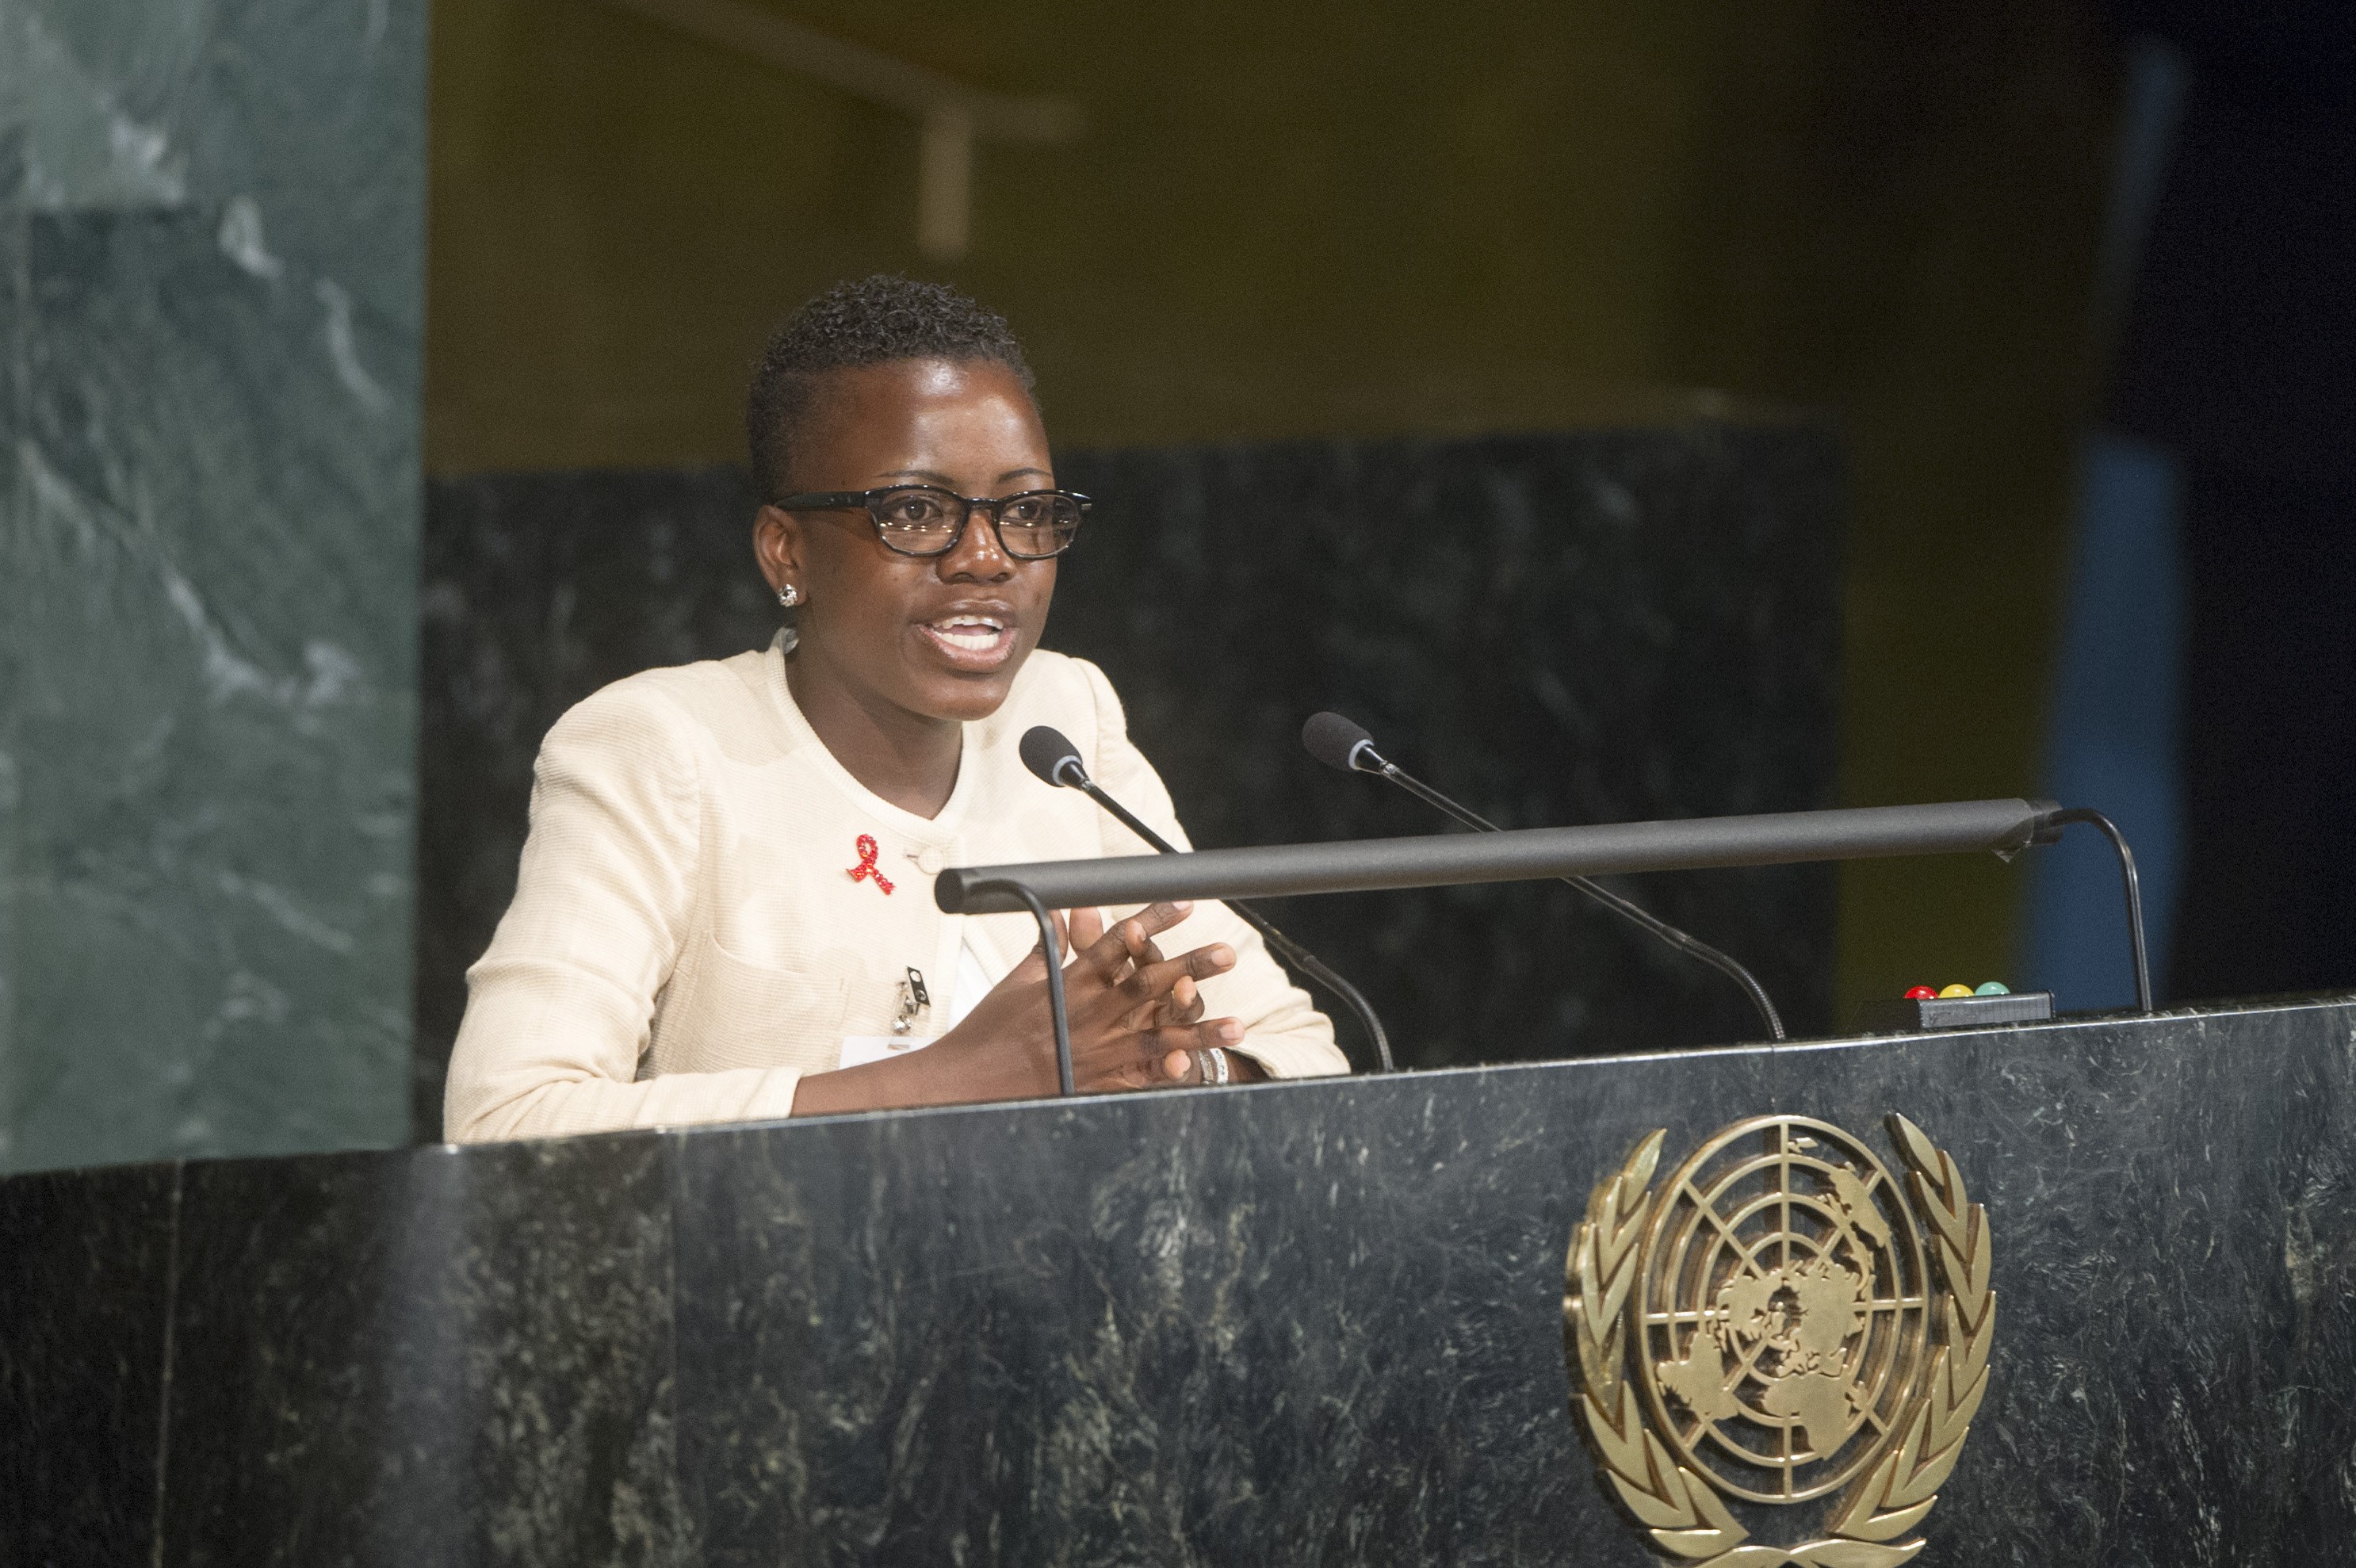 Loyce Maturu (Zimbabwe), nominated by HLM Stakeholder Task Force, addresses the High-level meeting of the General Assembly on HIV/AIDS Implementation of the Declaration of Commitment on HIV/AIDS and the political declarations on HIV/AIDS